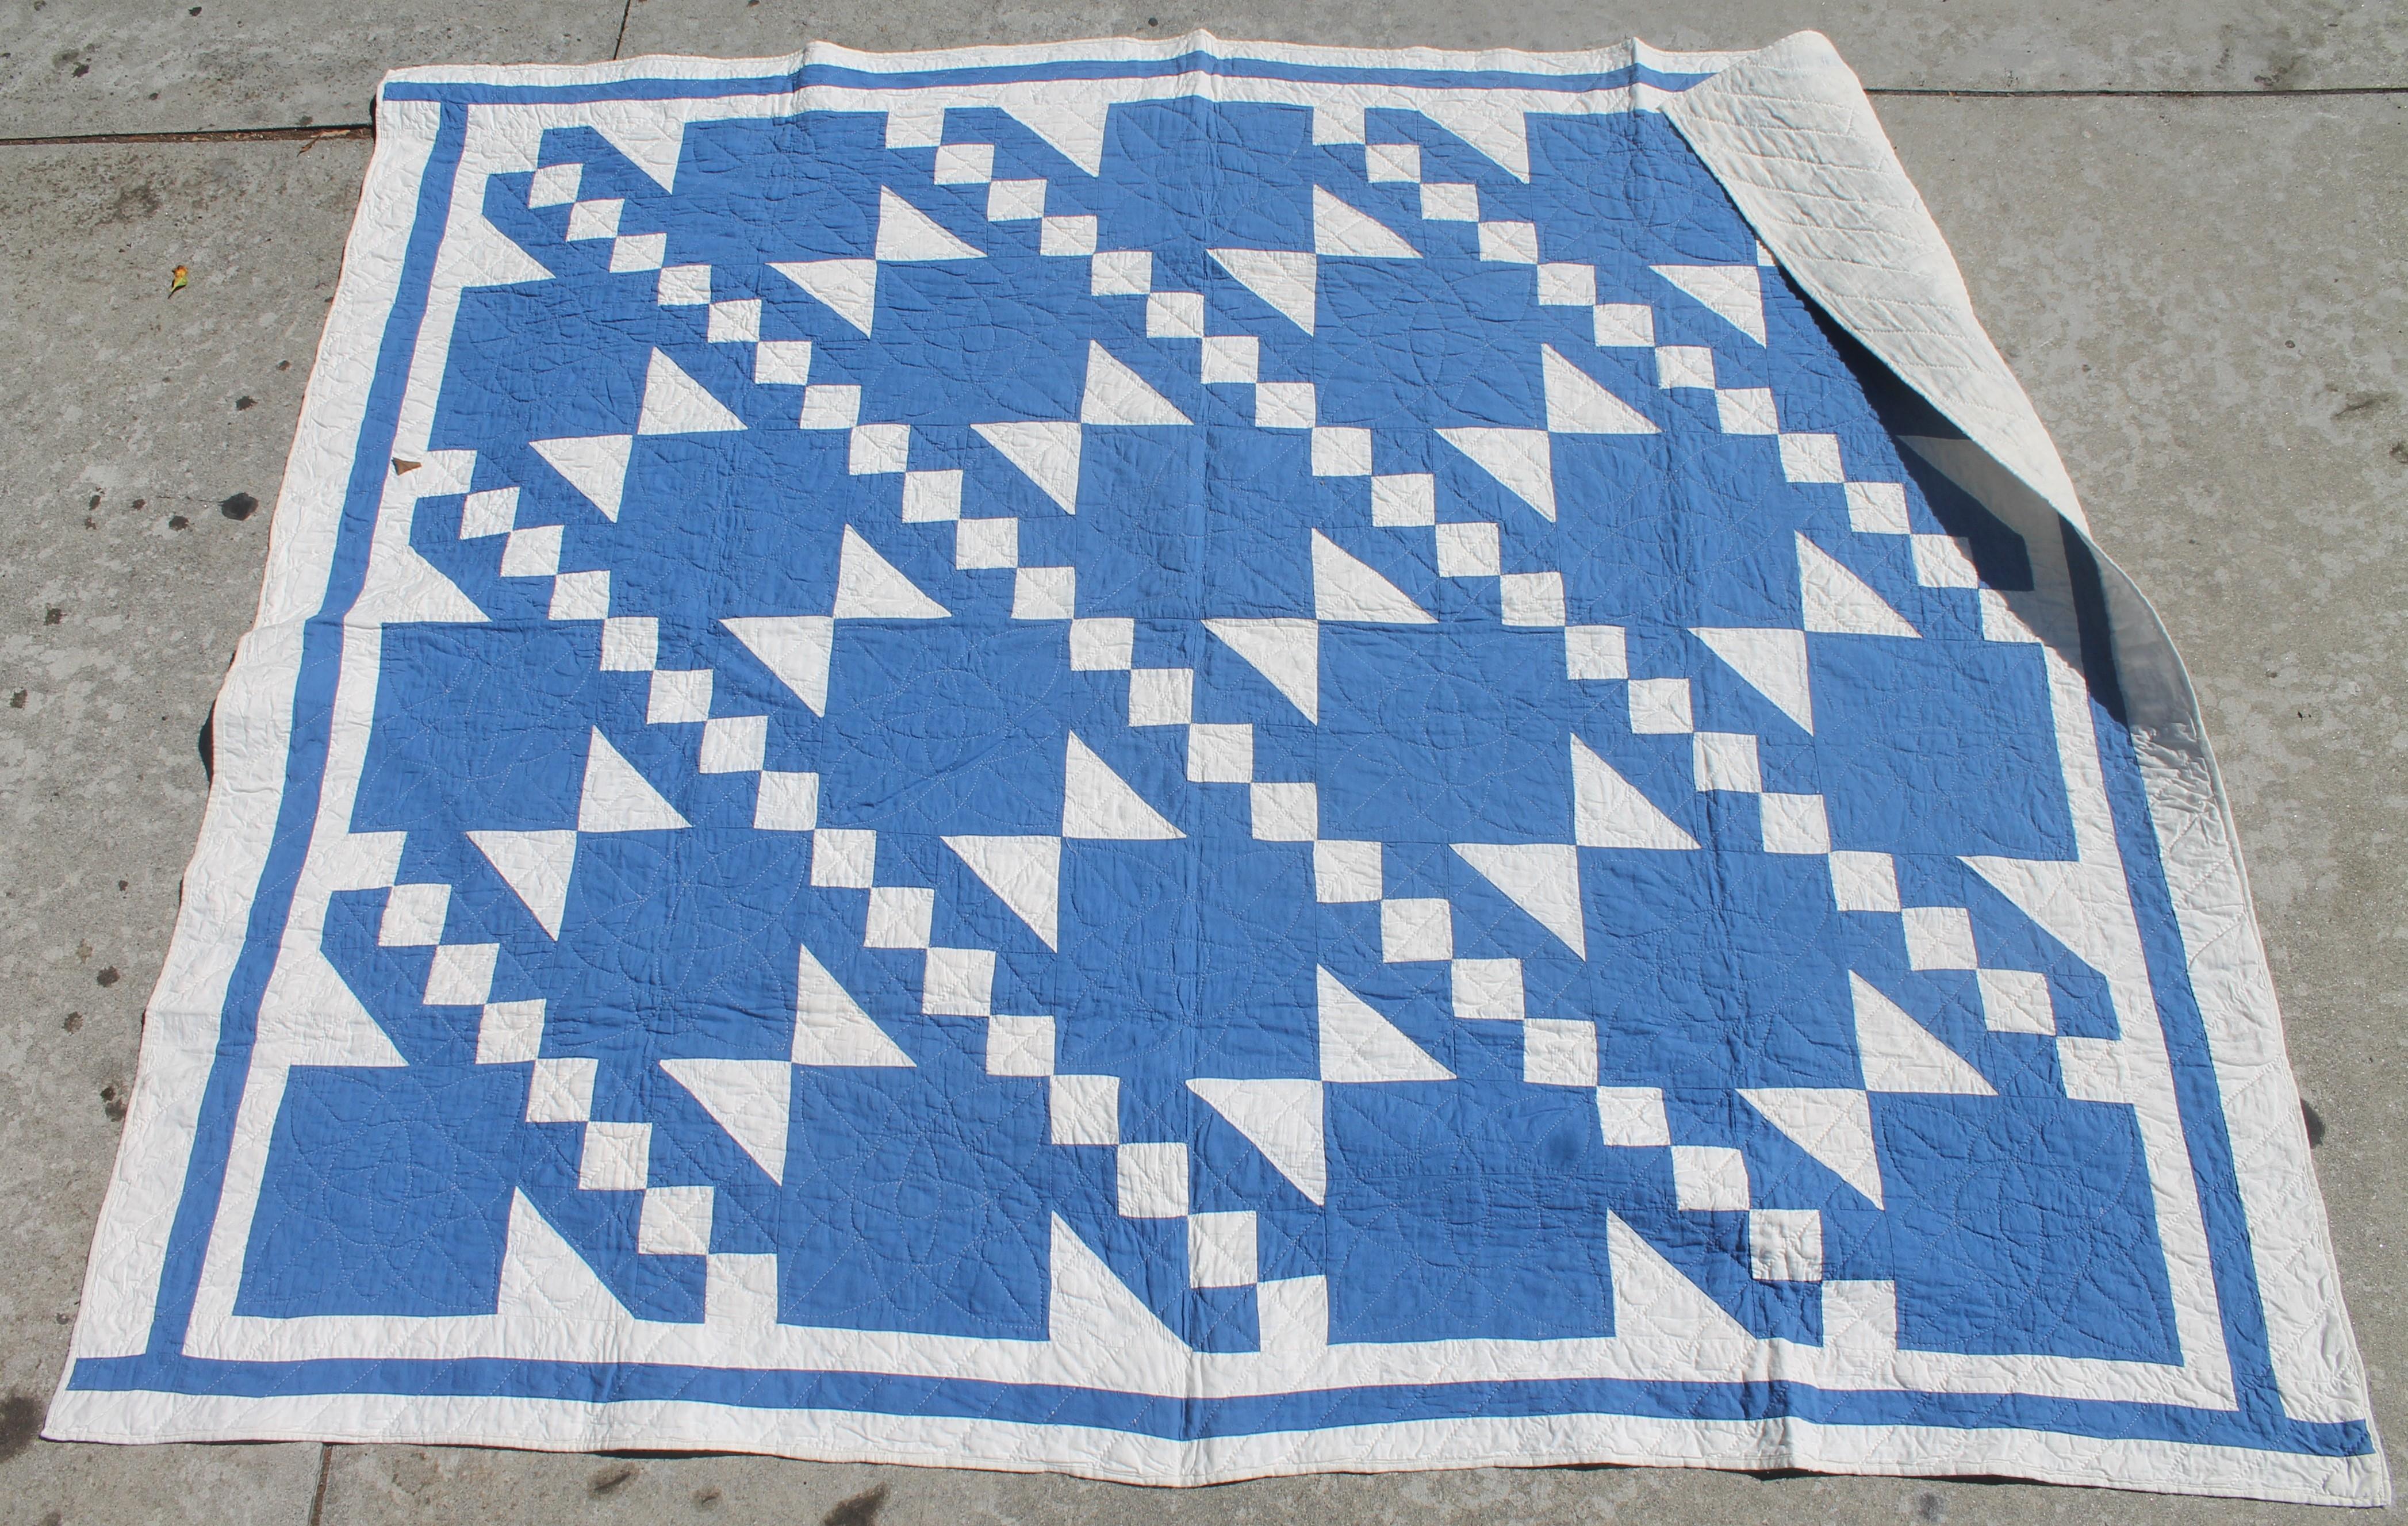 This unusual blue color is a fantastic pattern and fine quilting. The inner border frames it well. This is a smaller quilt and great for hanging.